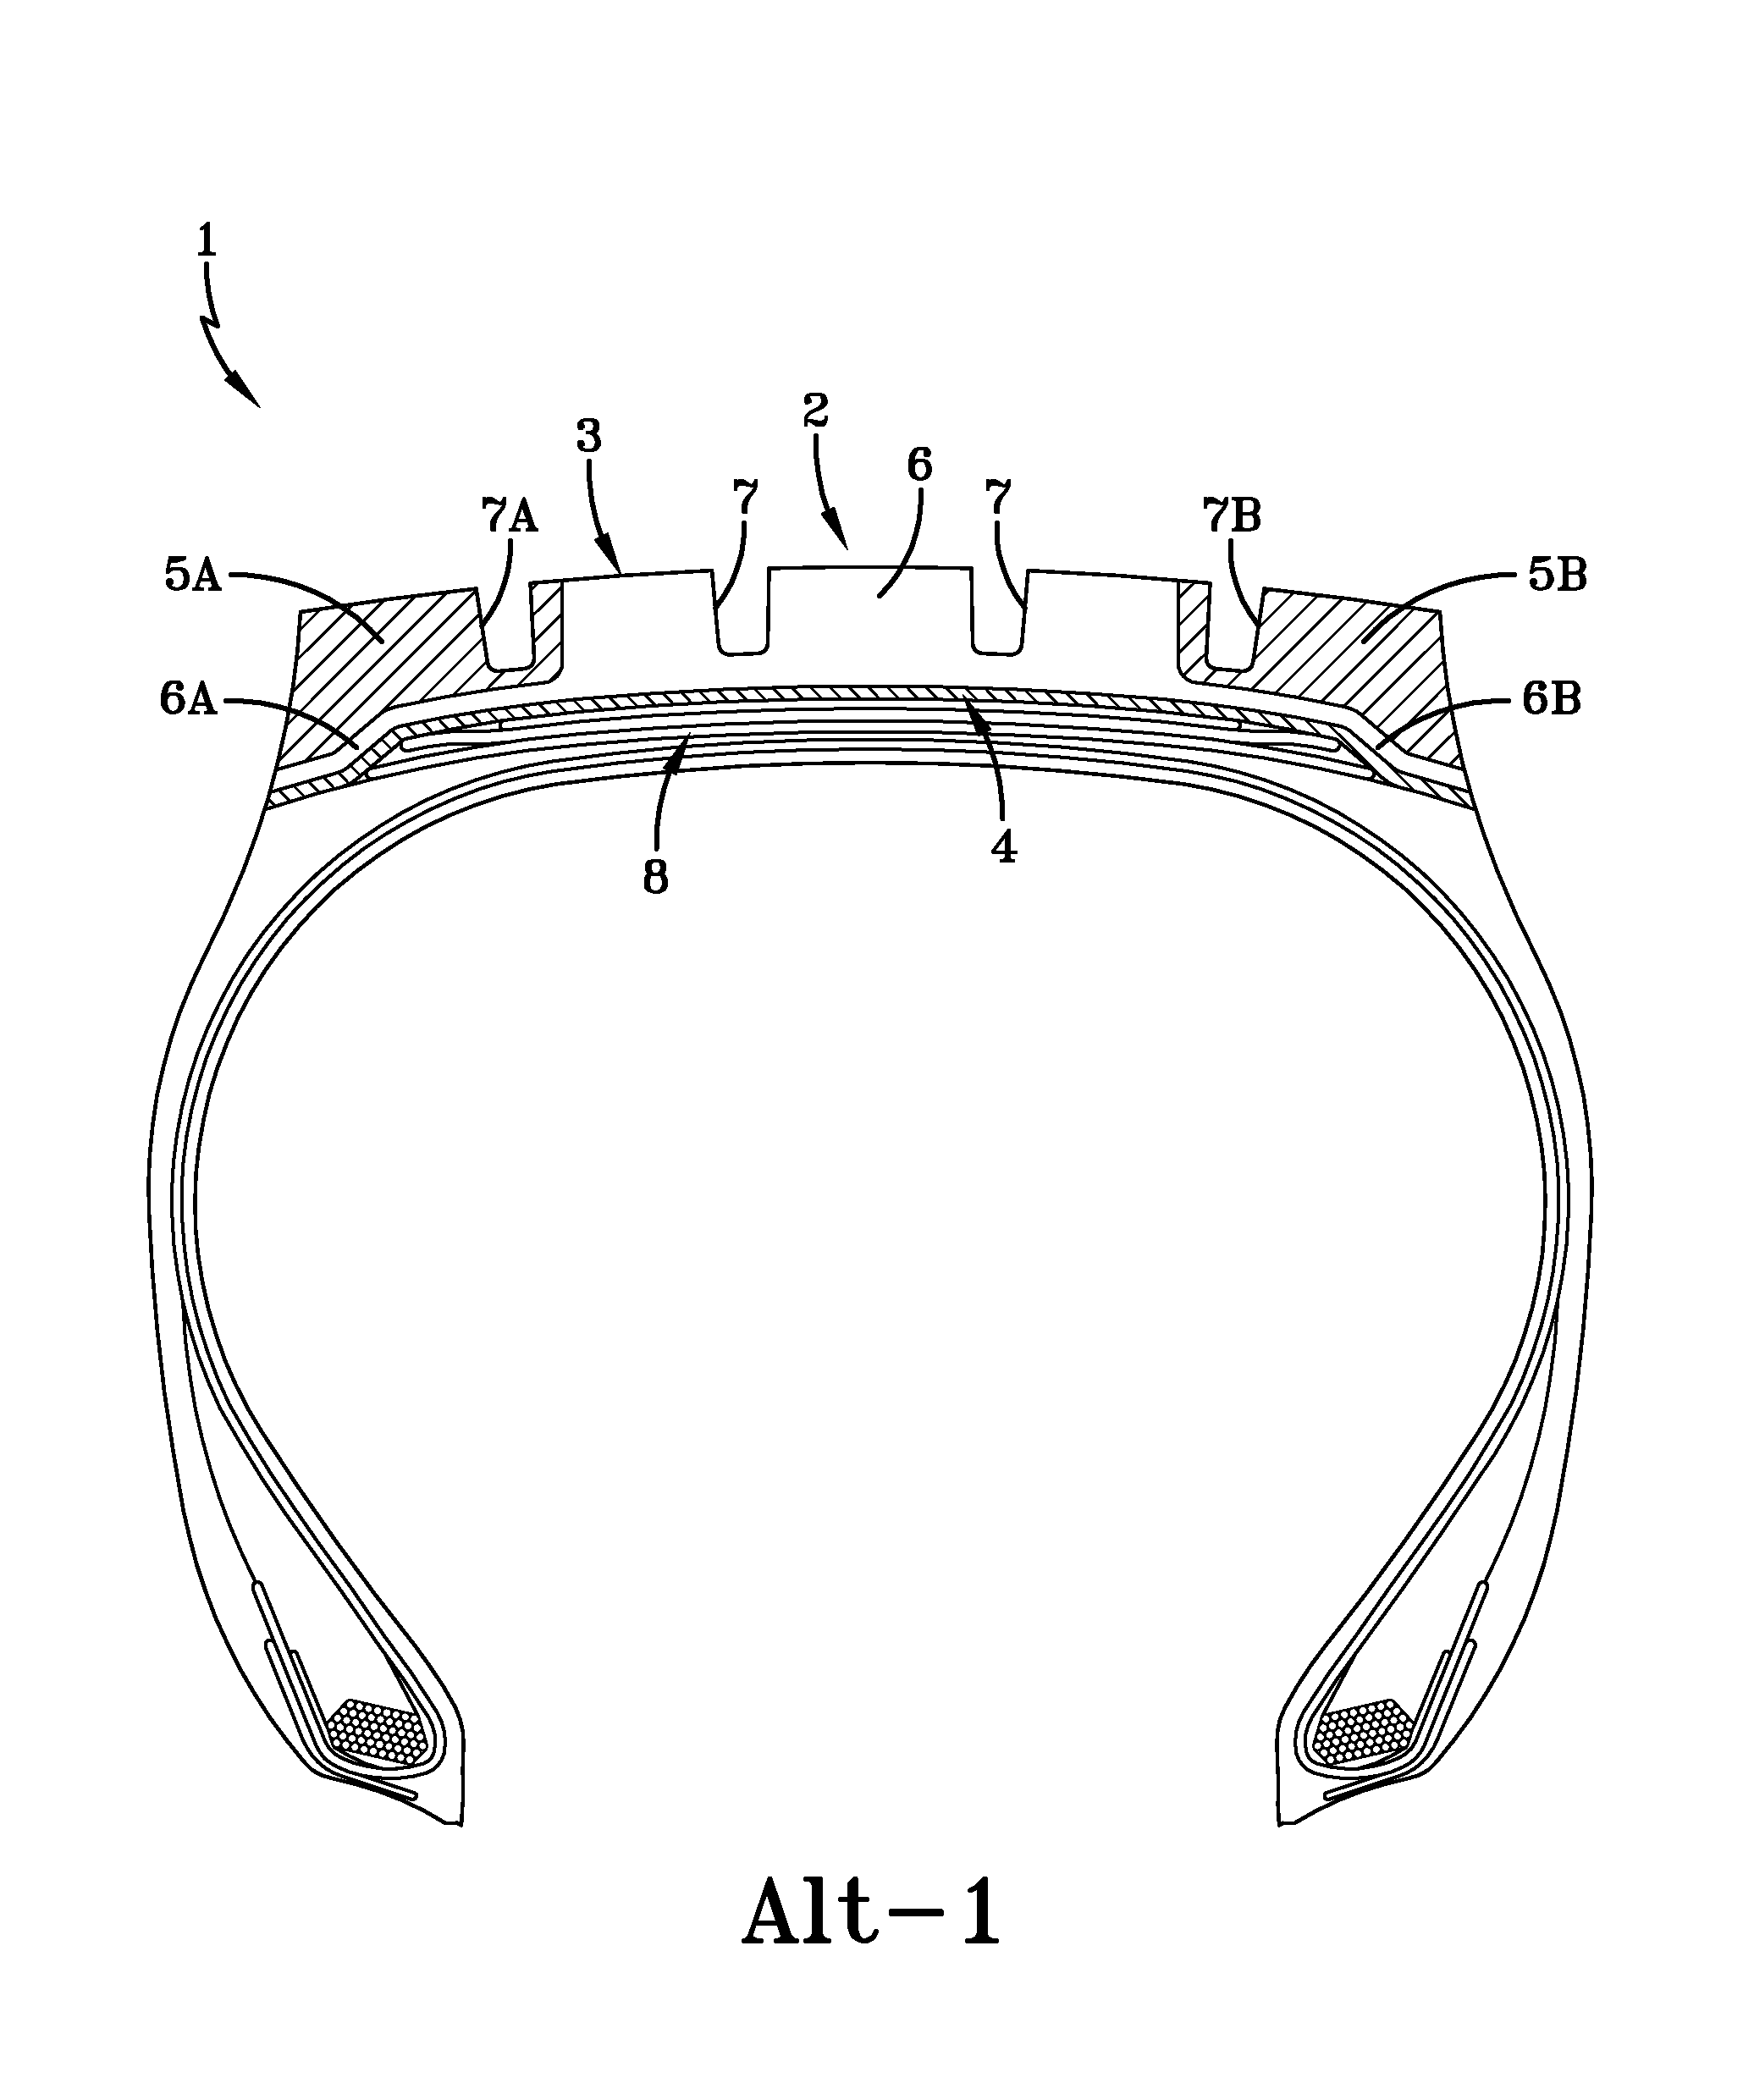 Tire with rubber tread of intermedial and peripheral stratified zones